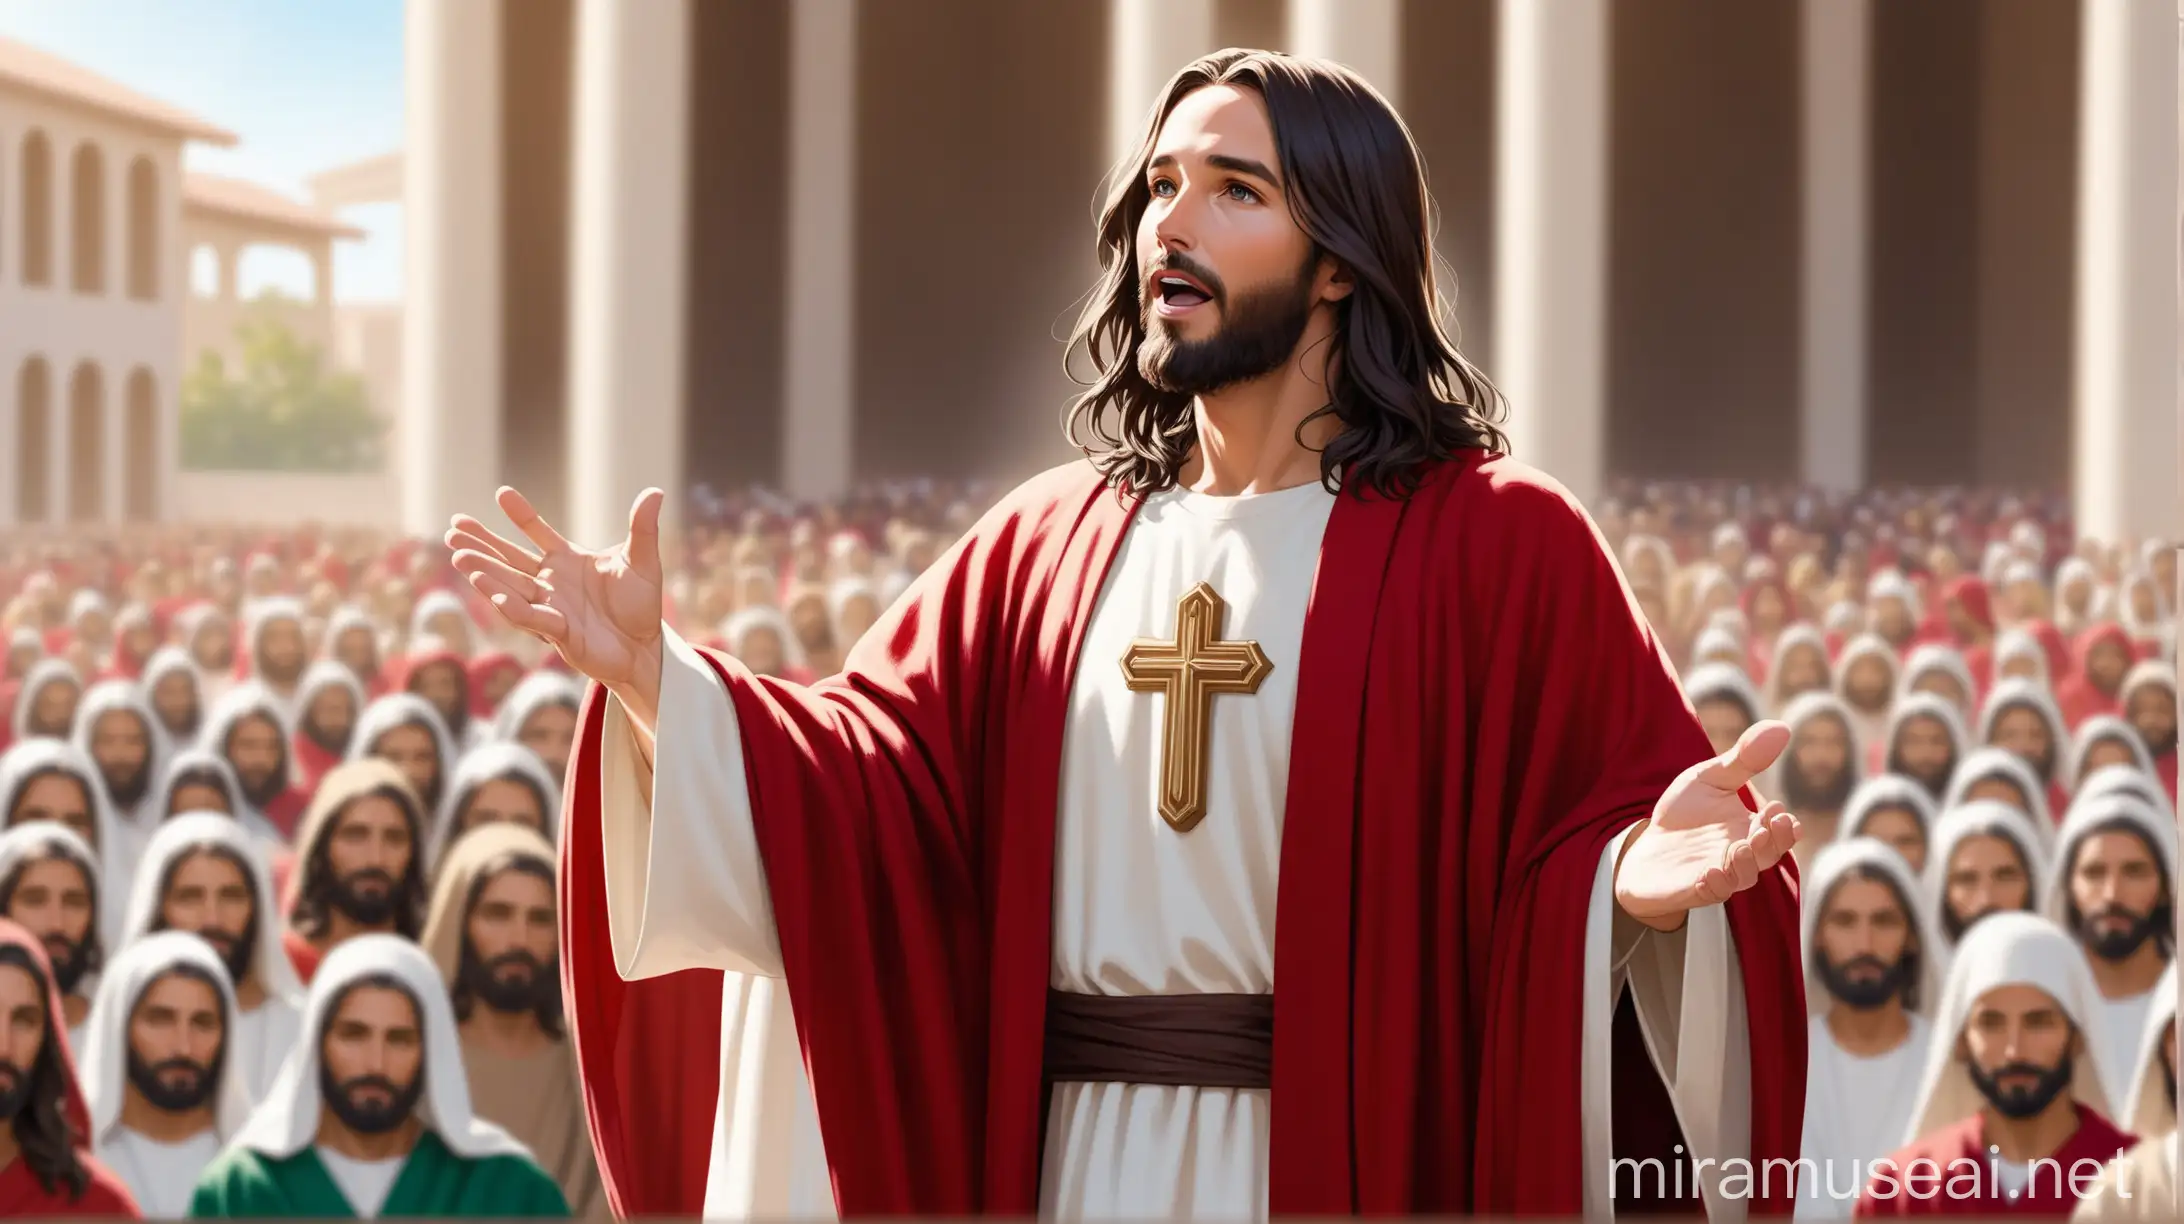 Sigma Jesus Christ Speaking to the Public in Detailed Red Robe